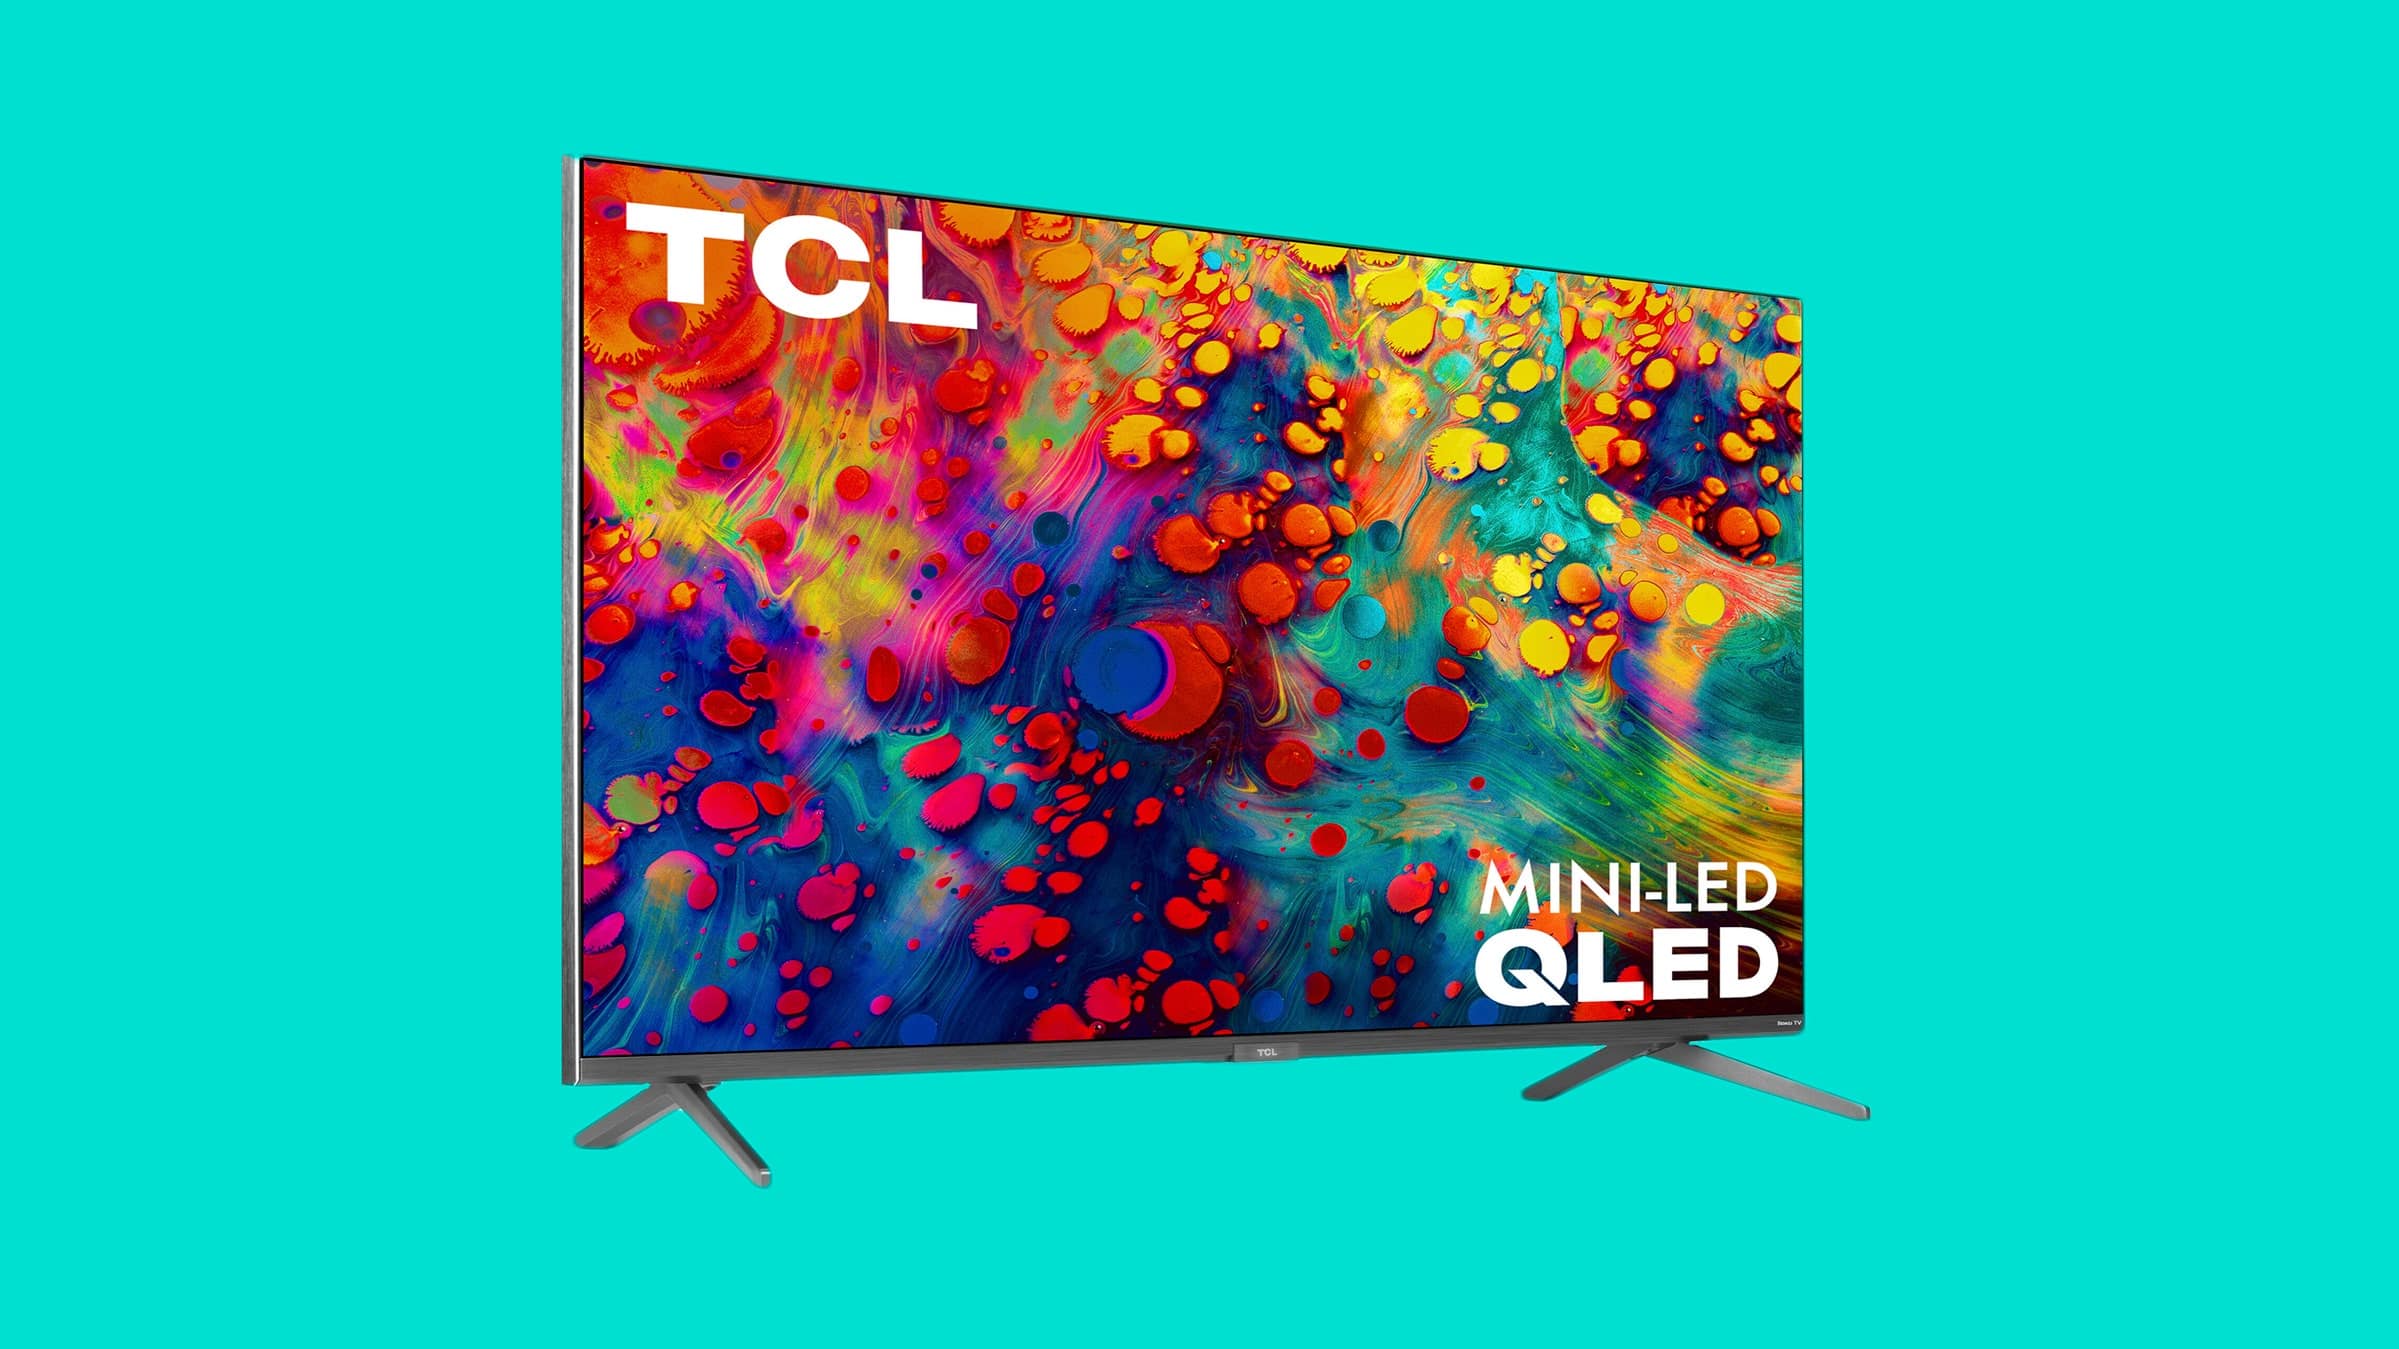 TCL displays the thinnest 85-inch 8K MiniLED TV at CES 2022